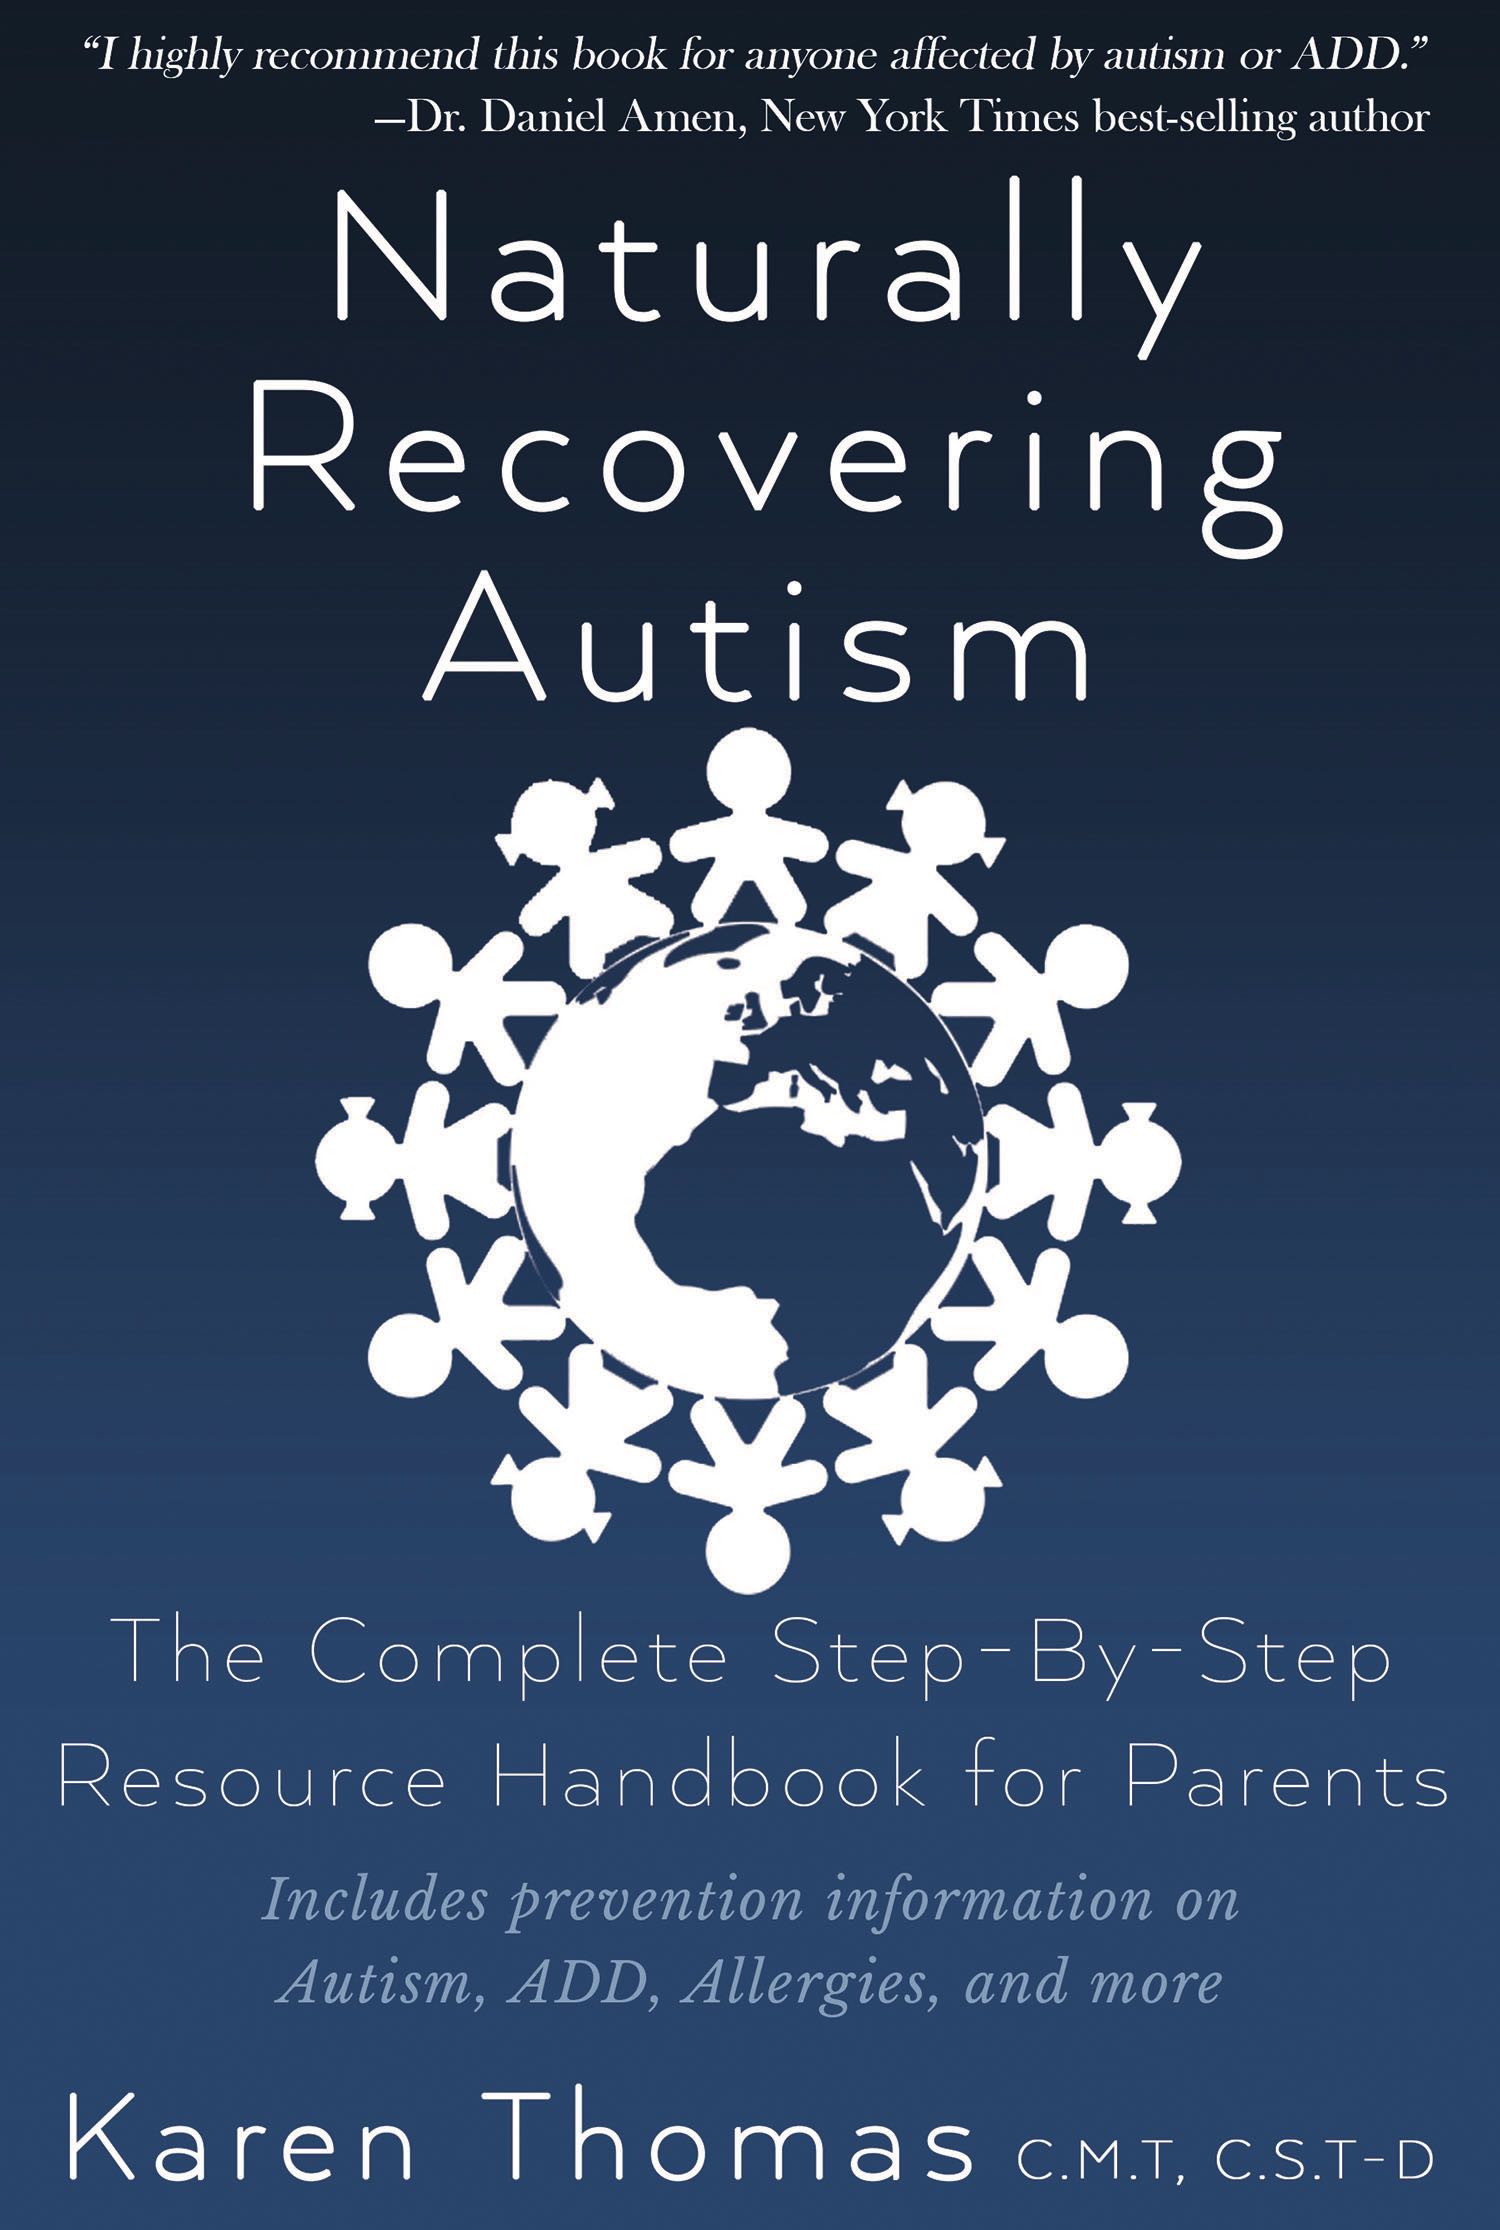 Naturally Recovering Autism book